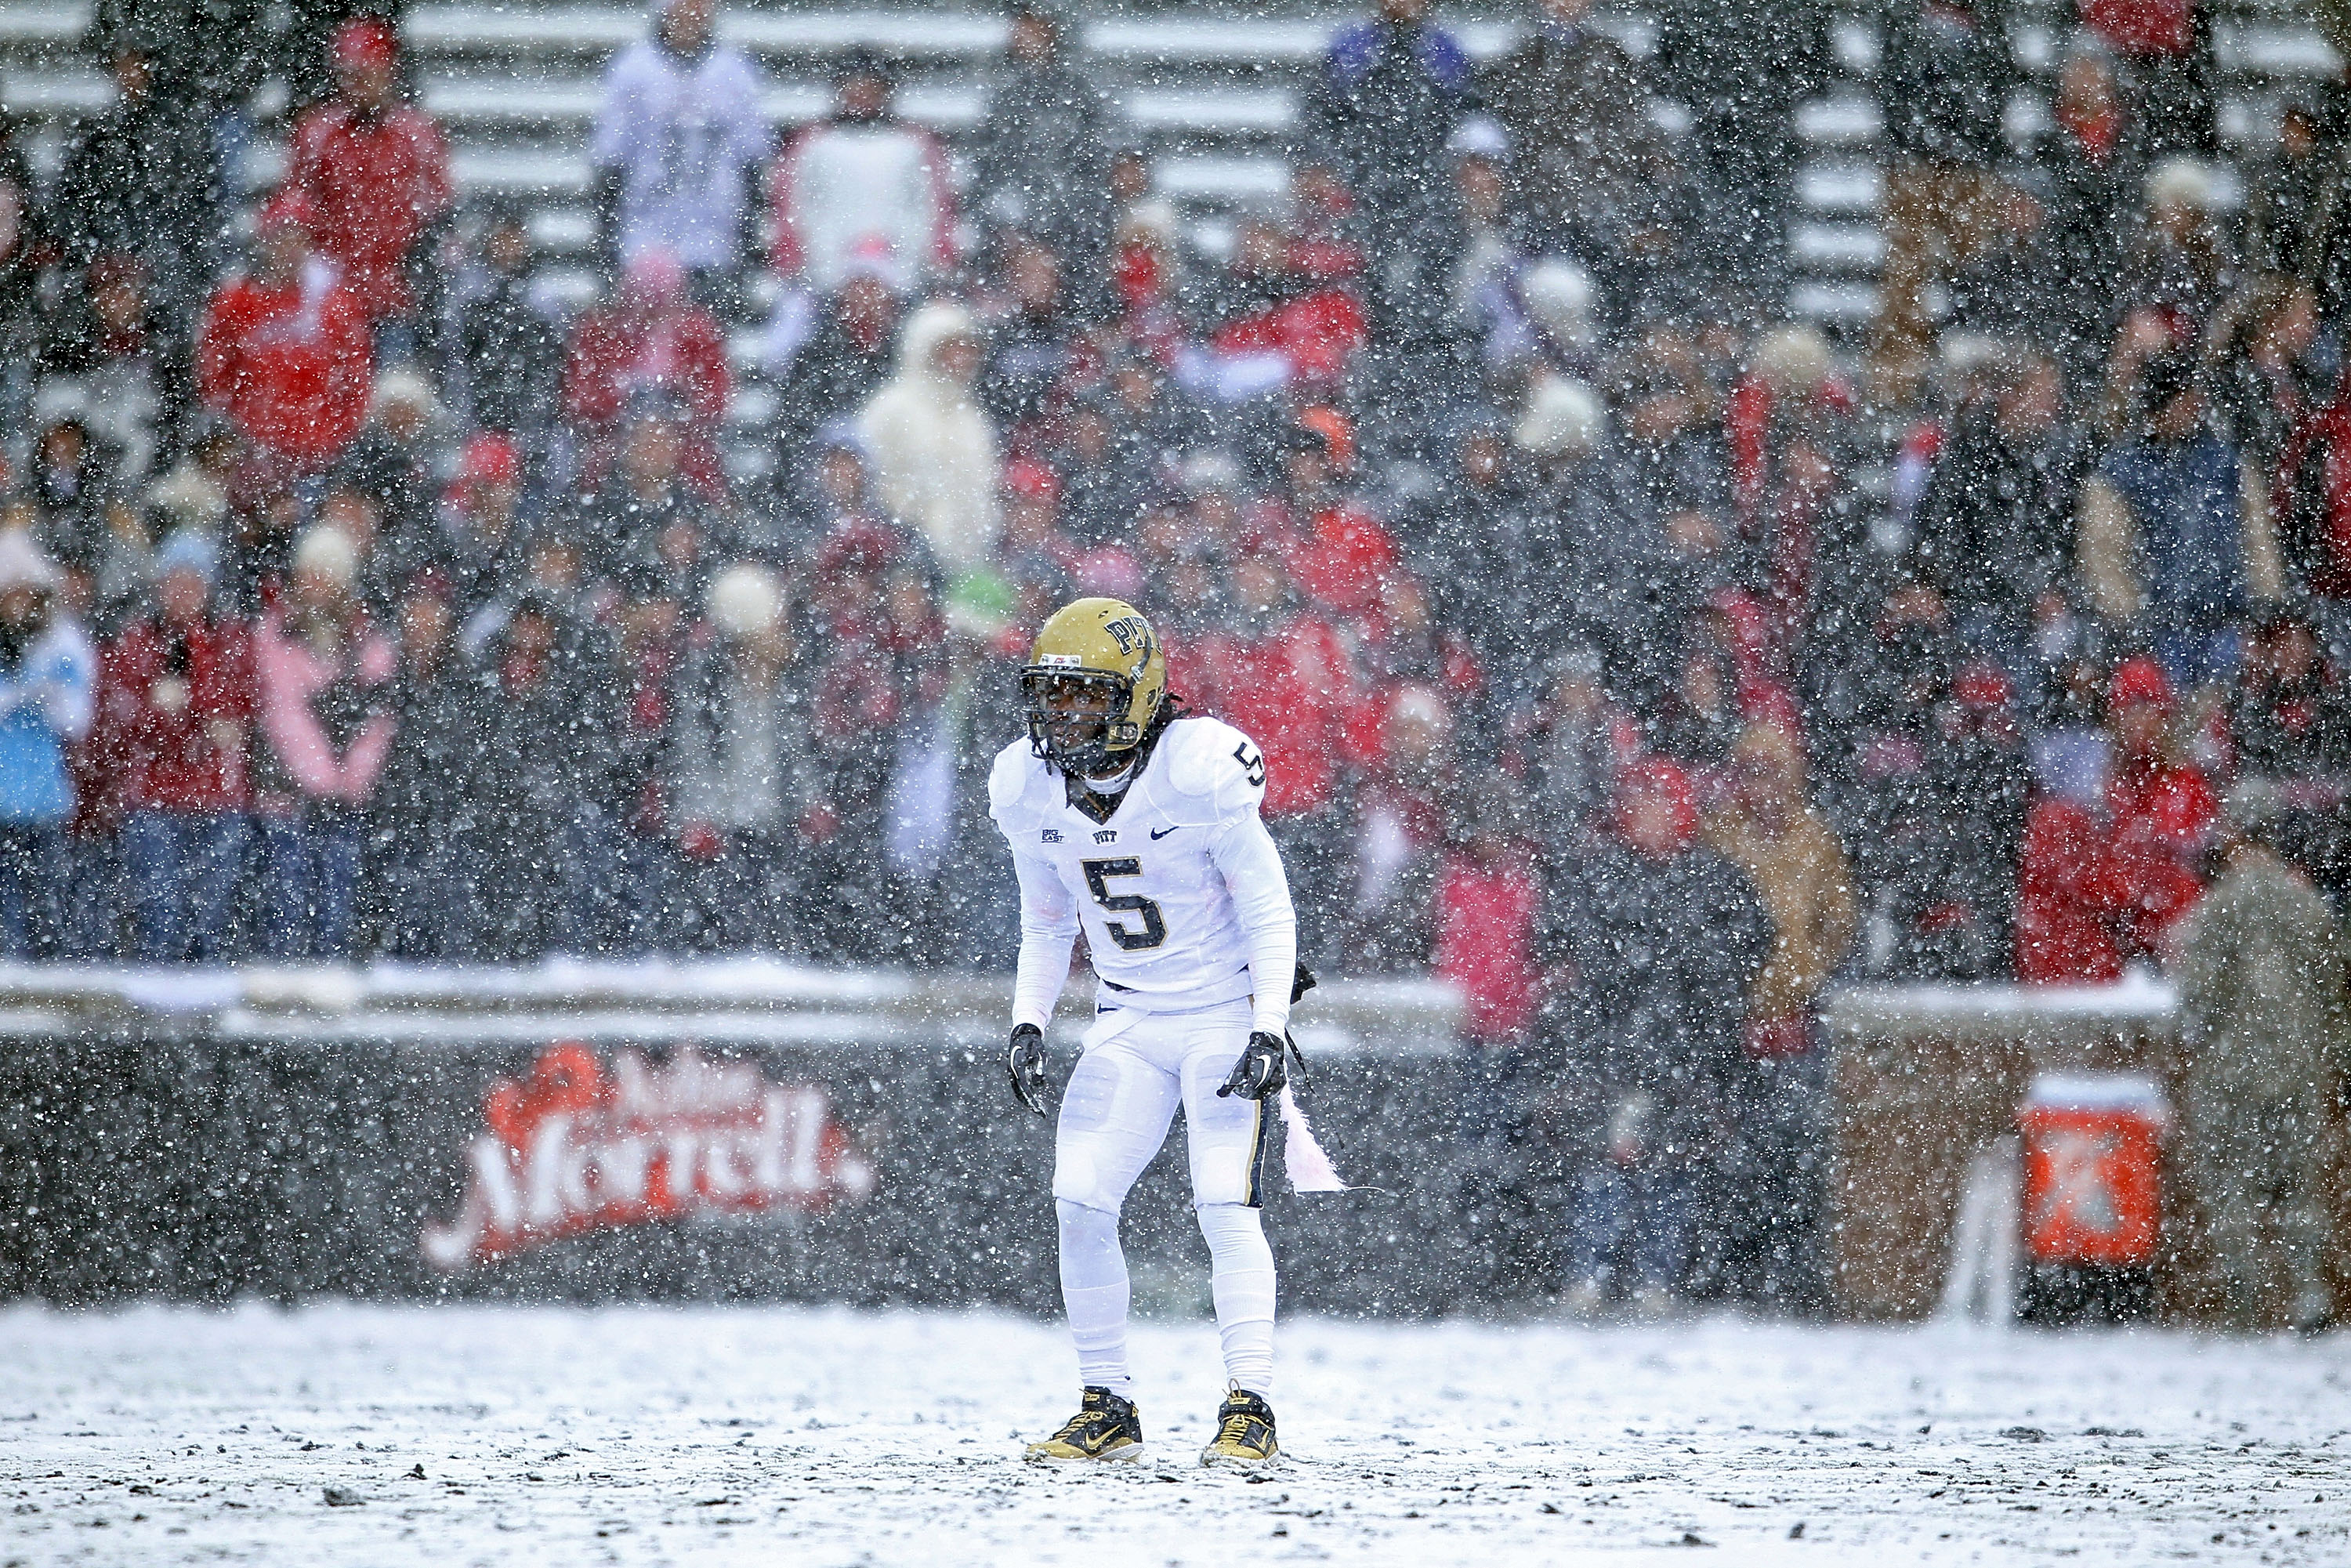 CINCINNATI, OH - DECEMBER 04:  Cameron Saddler #5 of the Pittsburgh Panthers waits to field a punt during the Big East Conference game against the Cincinnati Bearcats at Nippert Stadium on December 4, 2010 in Cincinnati, Ohio.  Pittsburgh won 28-10.  (Pho